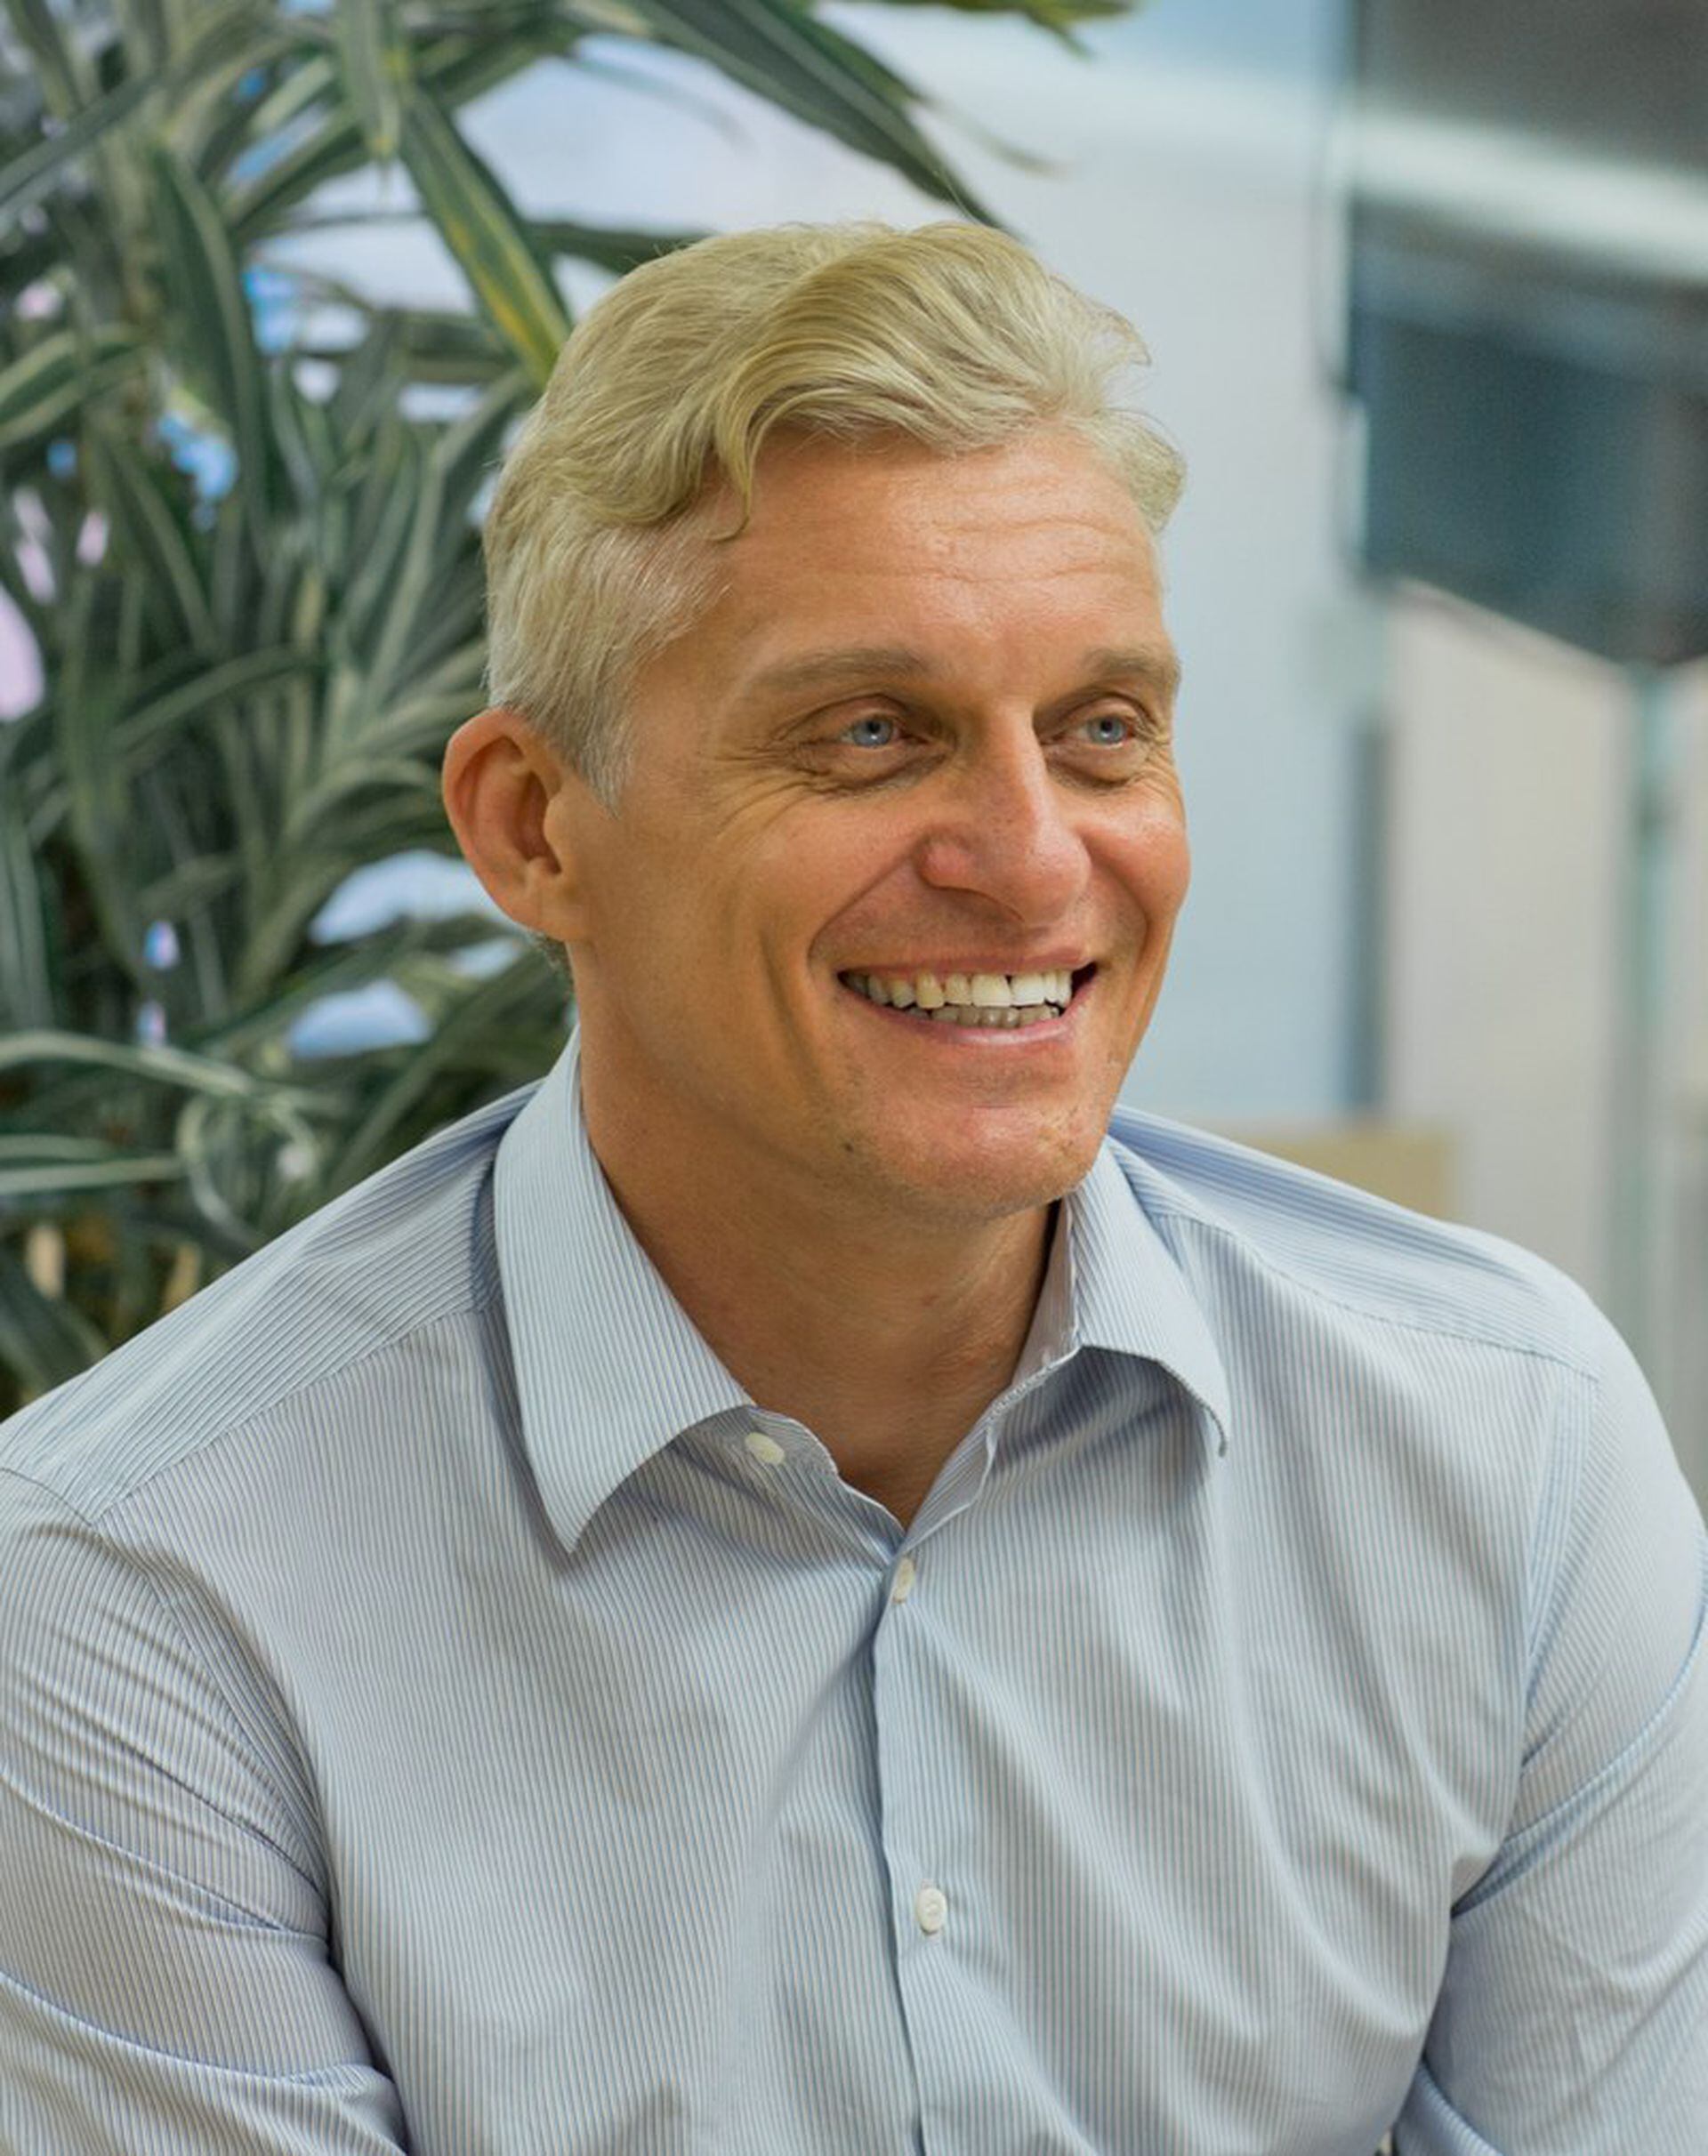 La Datcha is owned by Russian President Oleg Tinkov, 54.  Forbes estimates his net worth at $ 6.8 billion, making him the 608th richest person in the world.